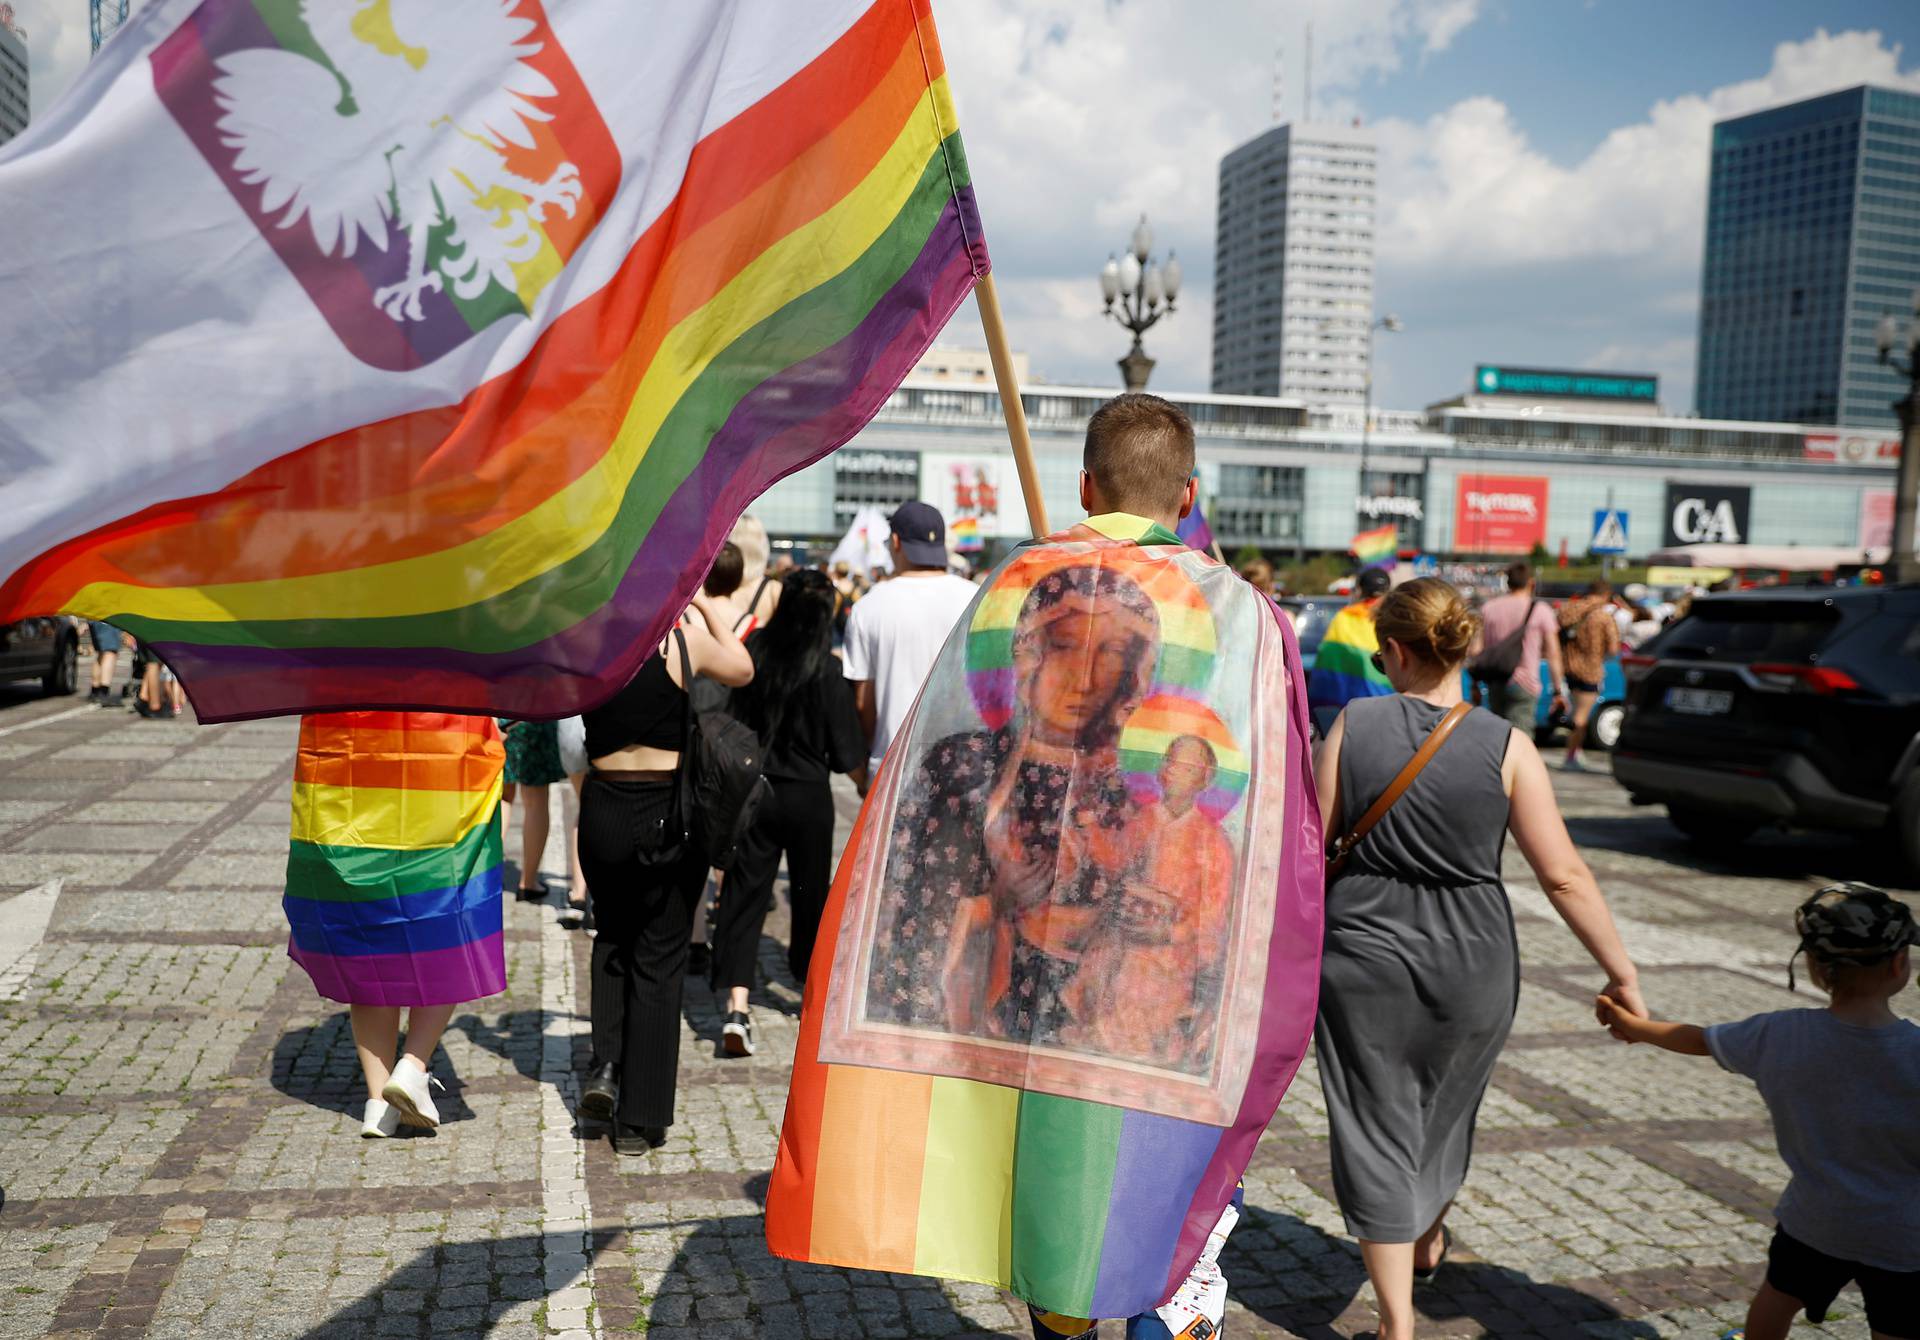 "Equality Parade" rally in support of the LGBT community, in Warsaw